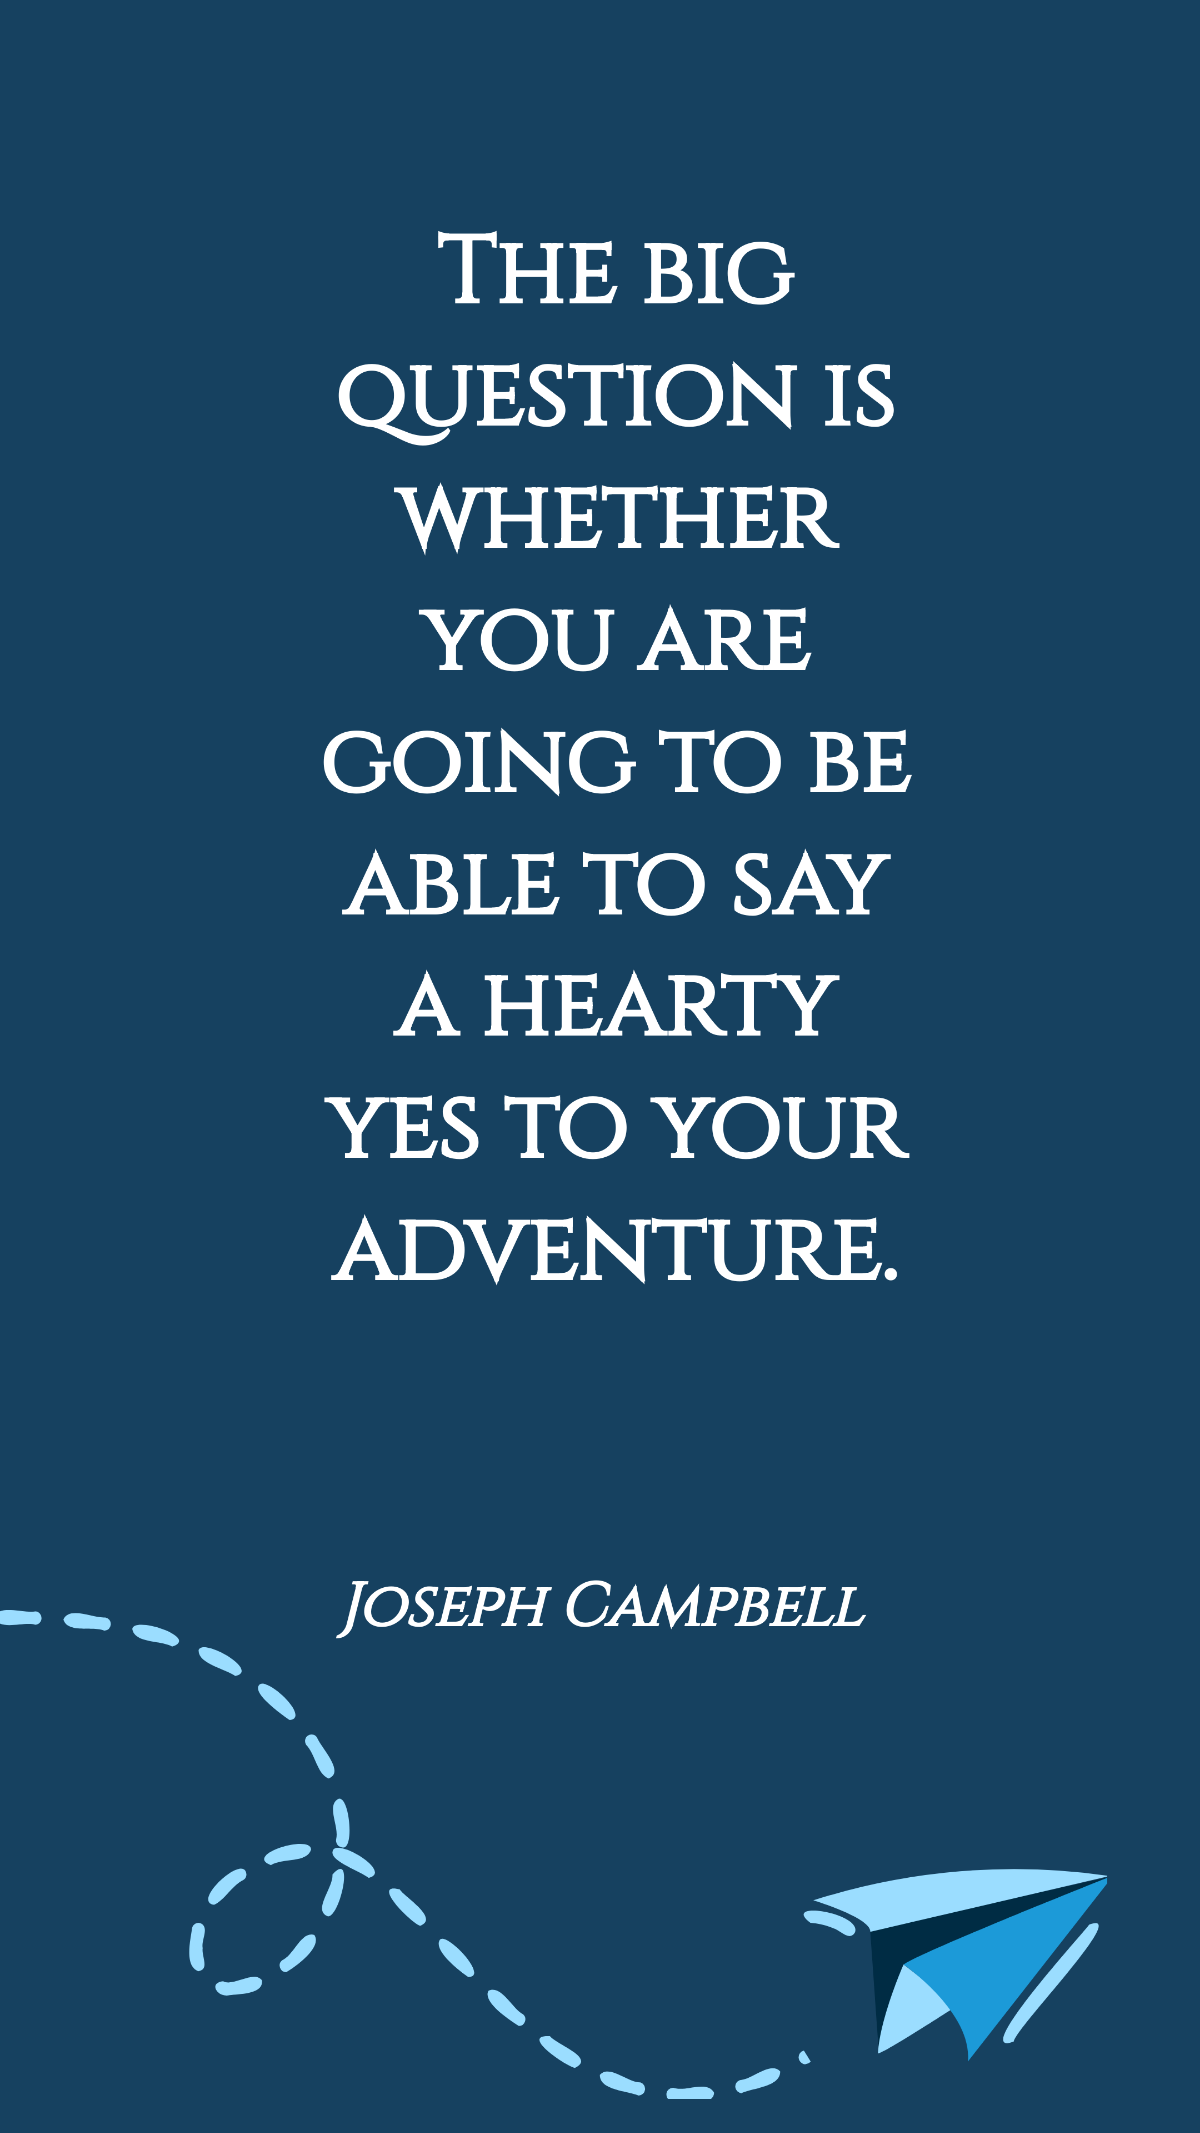 Joseph Campbell - The big question is whether you are going to be able to say a hearty yes to your adventure.